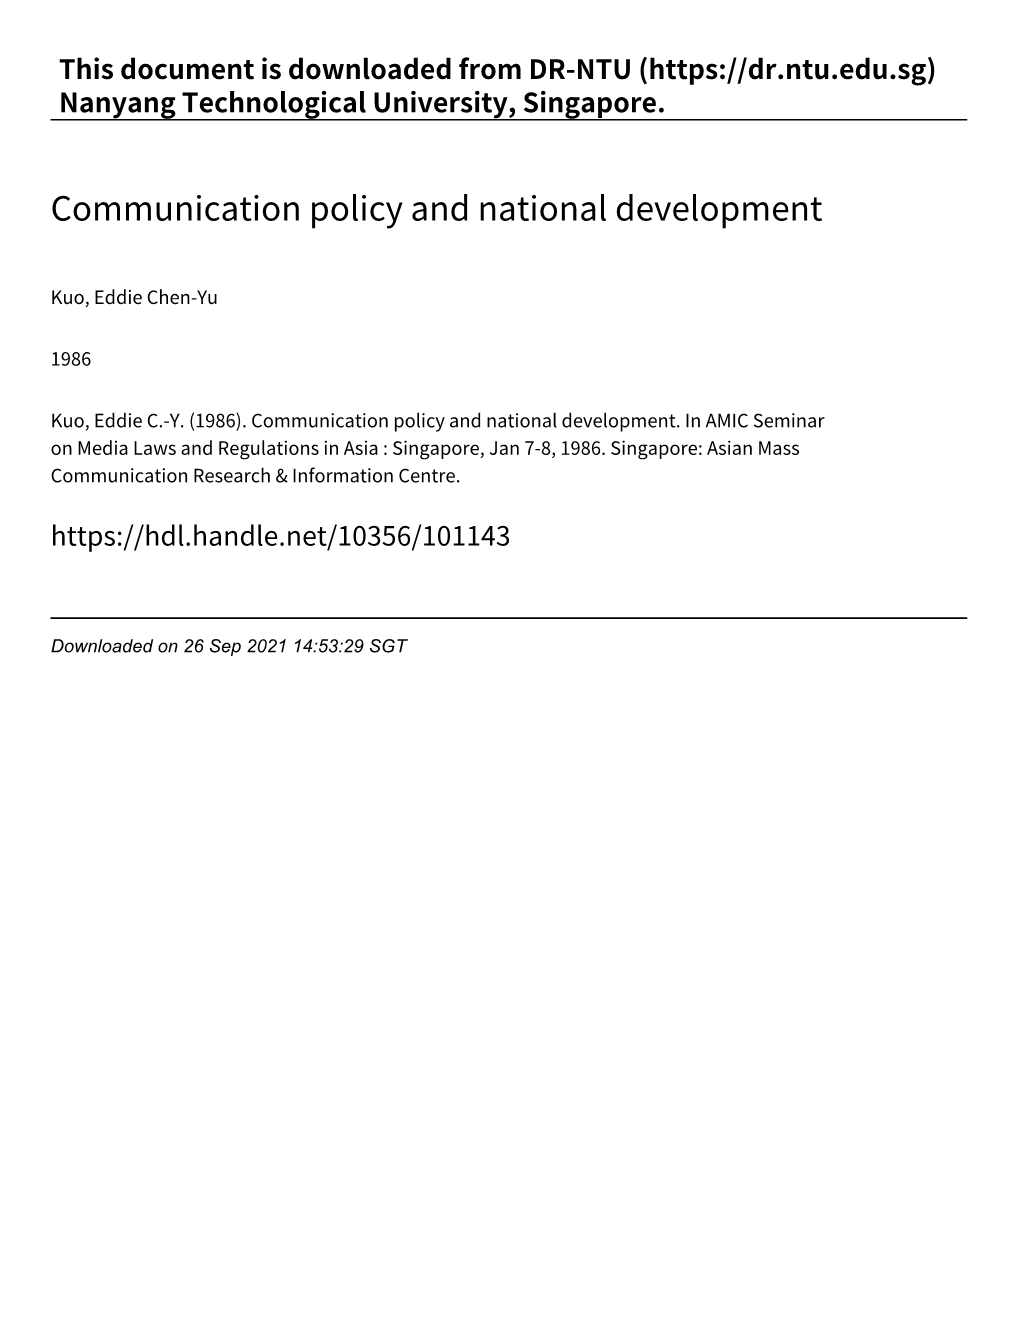 Communication Policy and National Development